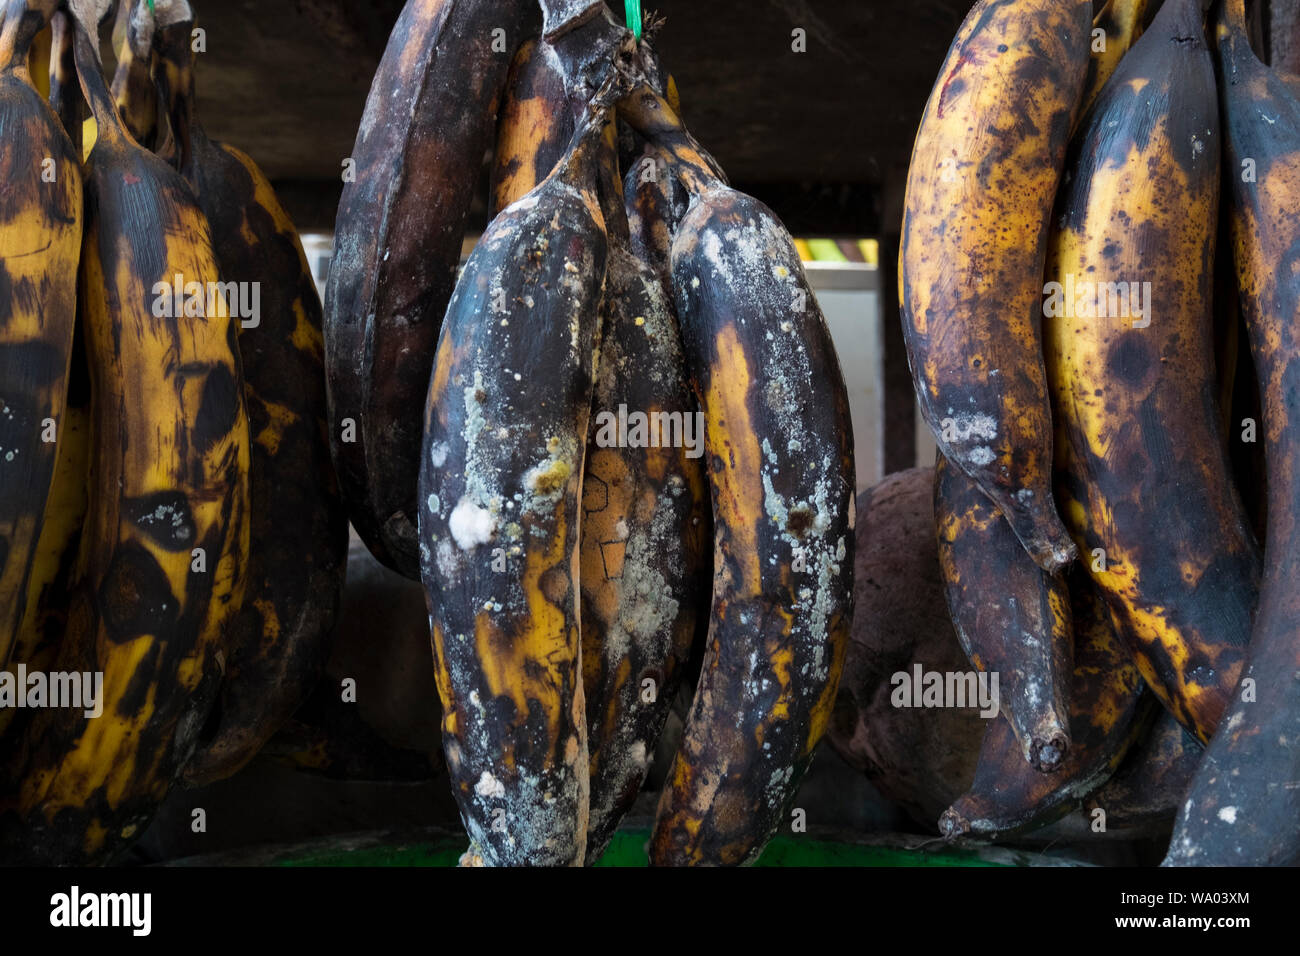 Moldy, brown, overripe bananas are hanging and for sale in a local market in Kuching, Malaysia. Stock Photo